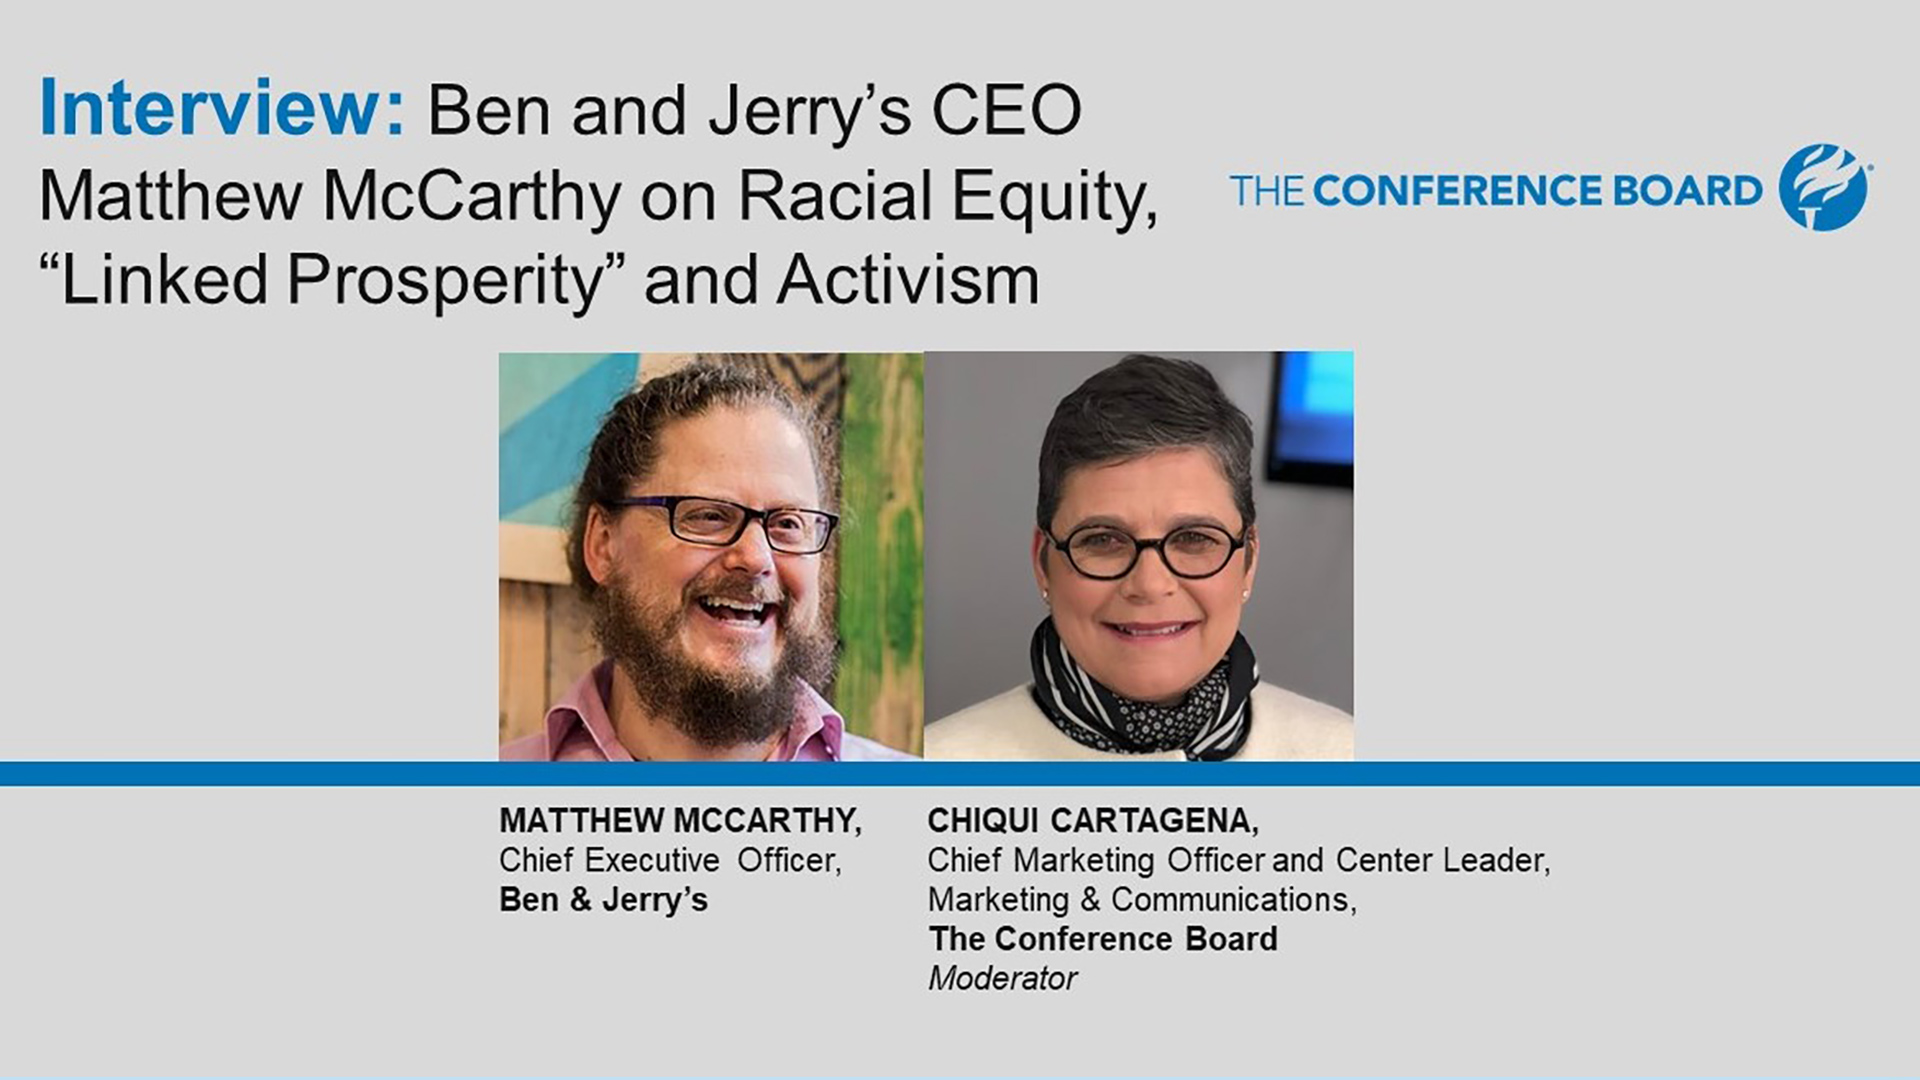 Building a More Civil & Just Society: Session F - Ben and Jerrys CEO Matthew McCarthy on Racial Equity, Linked Prosperity and Activism. 26 Mins